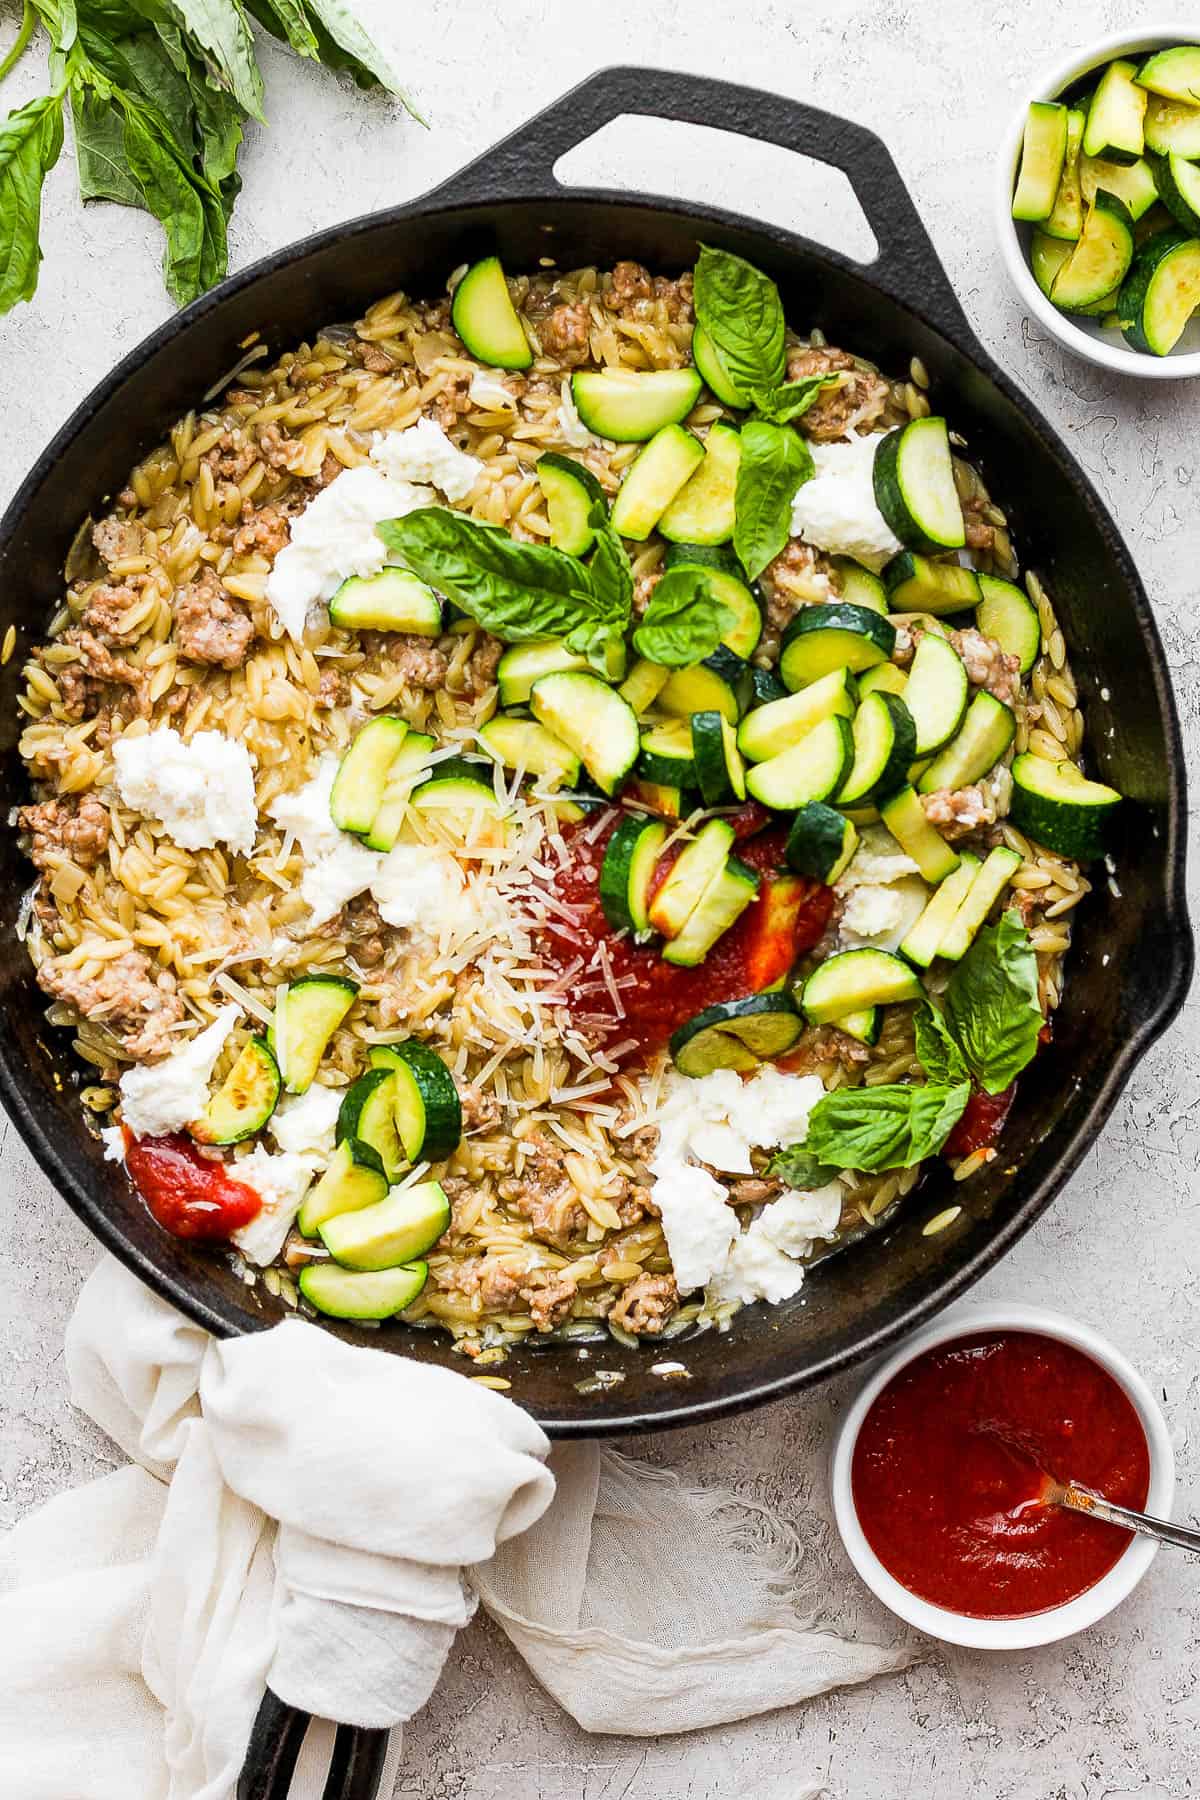 The sausage zucchini skillet with cheese mixed in and zucchini added.